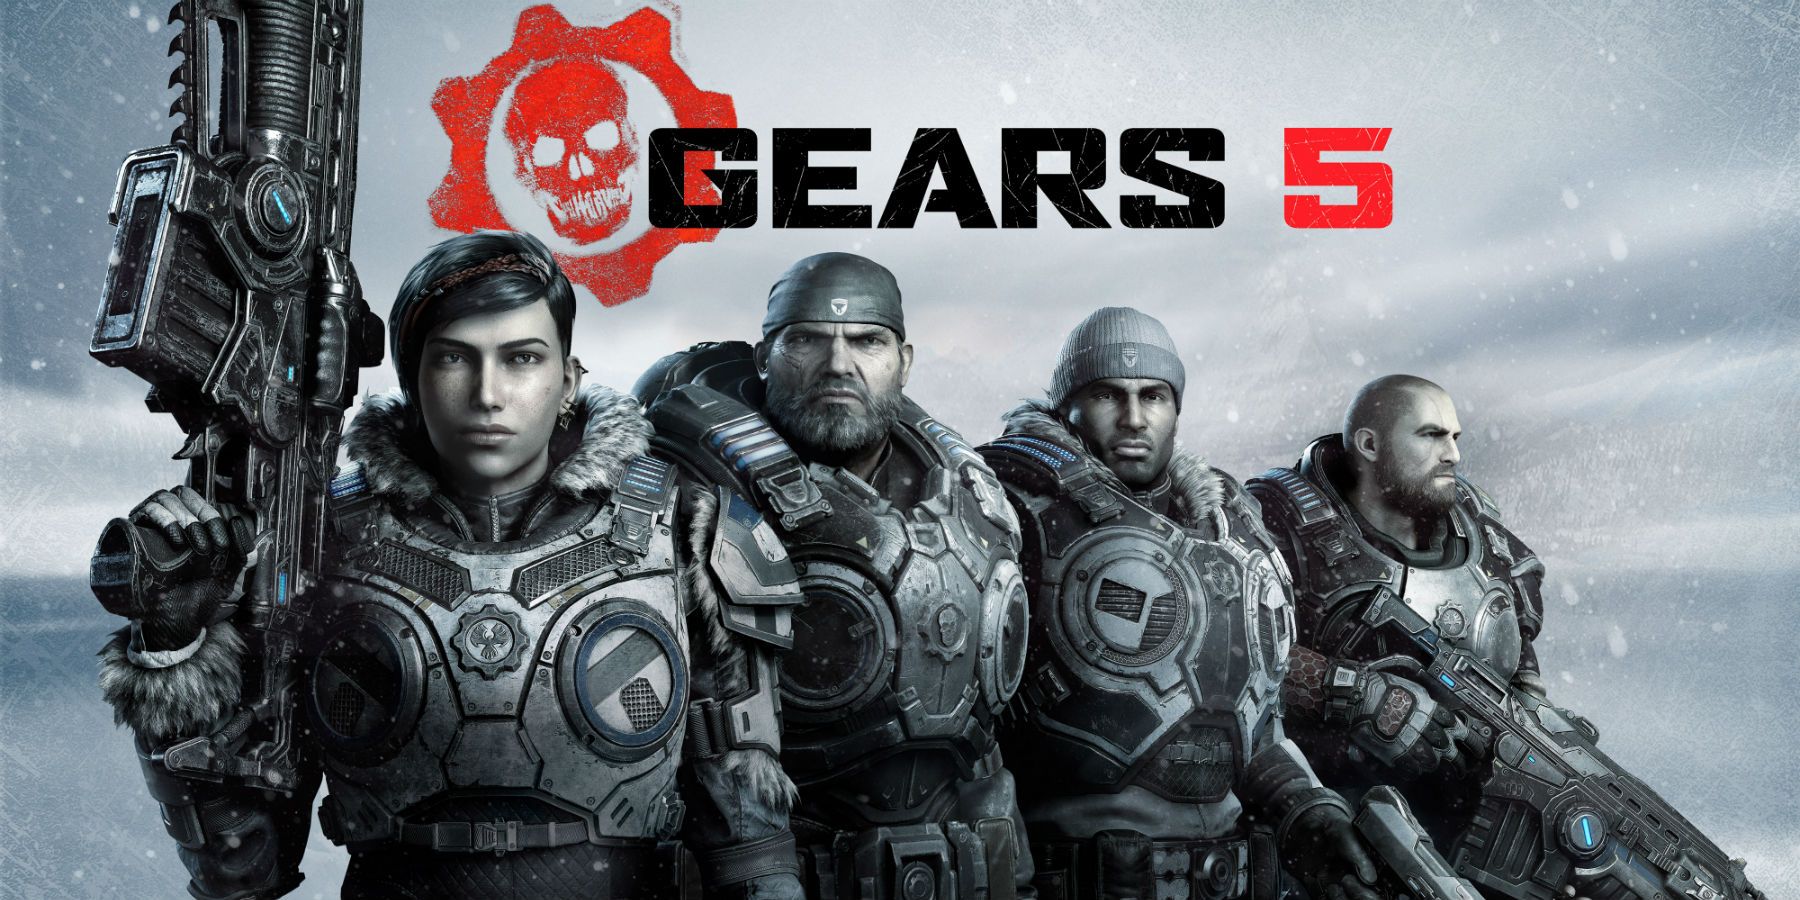 Key Art for Gears of War 5 showing the whole team in a line in front of a snowy background